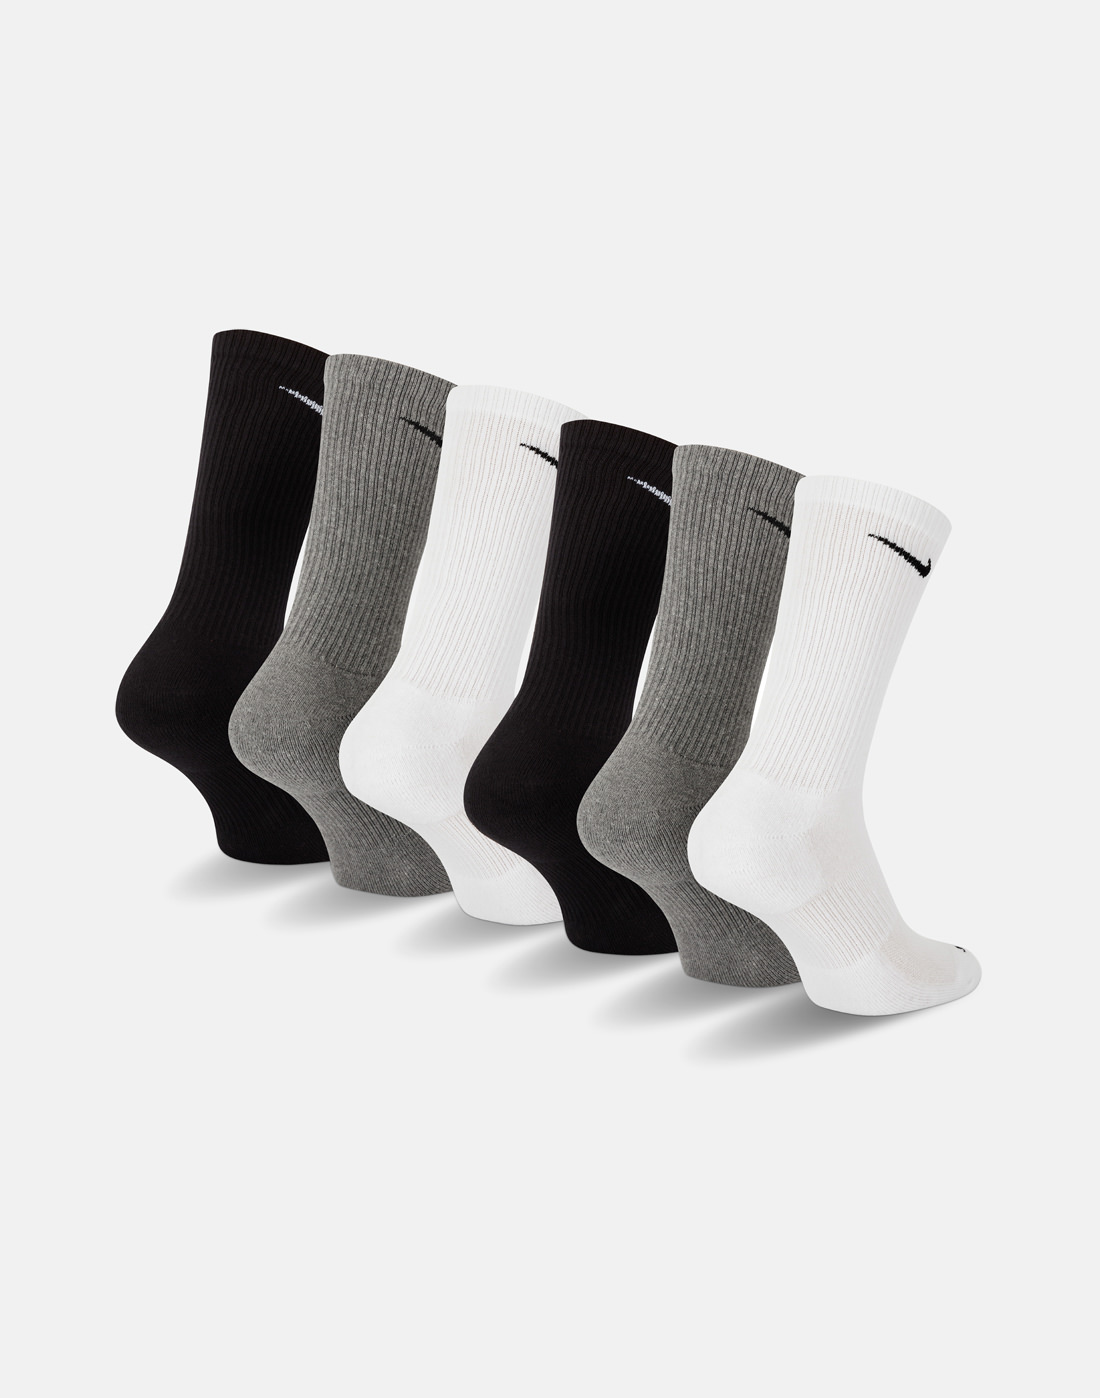 Nike Everyday Cushion 6 Pack Crew Socks - Assorted | Life Style Sports IE